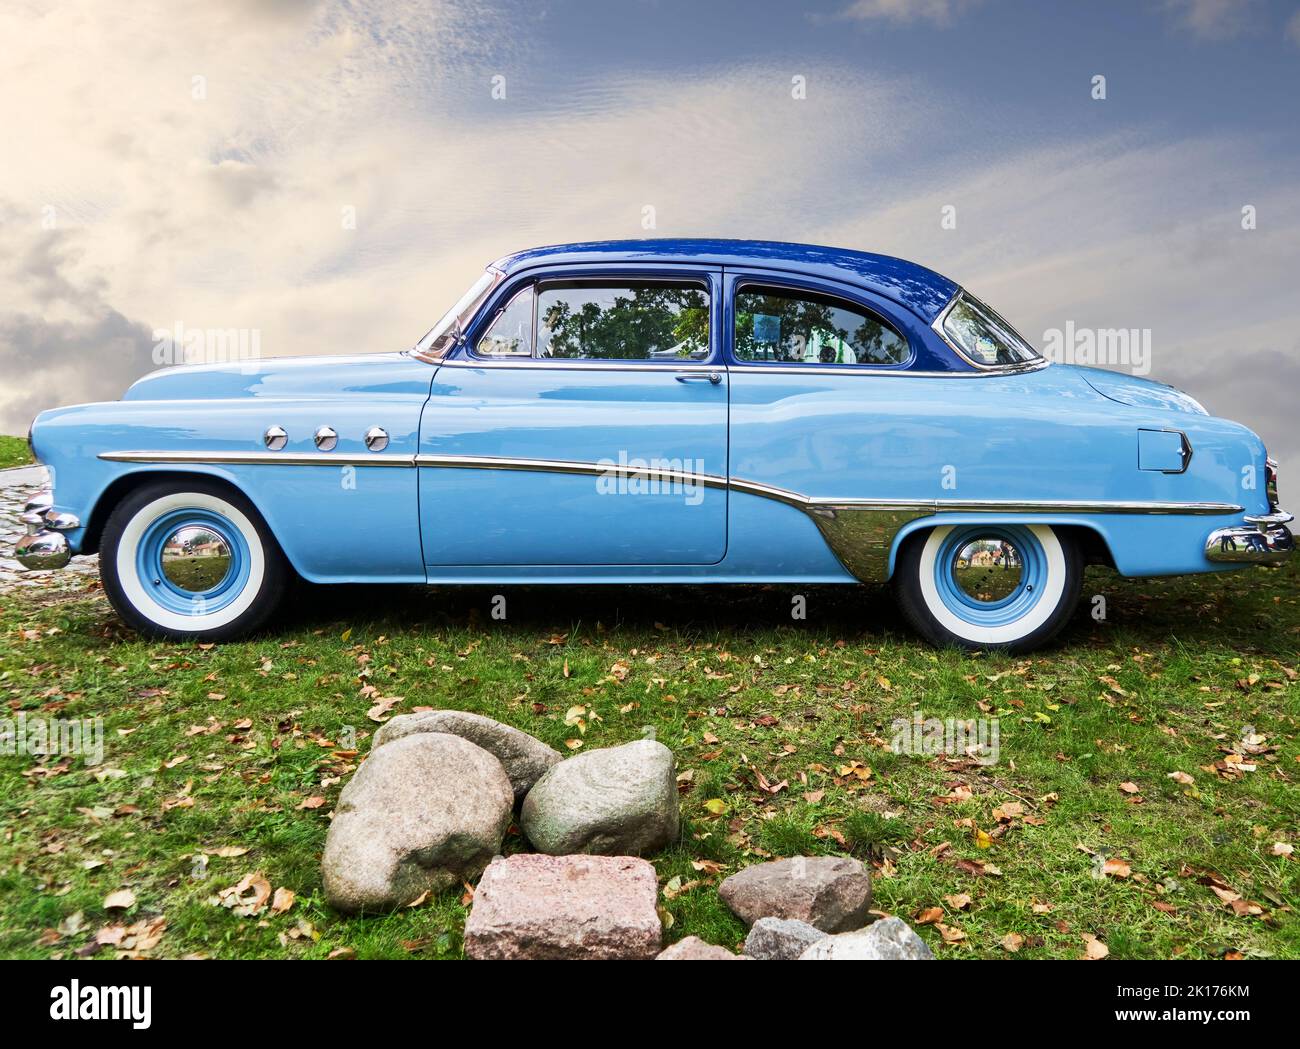 Buick eight oldtimer in blue livery on a lawn against cloudy background, Vehicle location Lehnin, Germany, September 11, 2022. Stock Photo